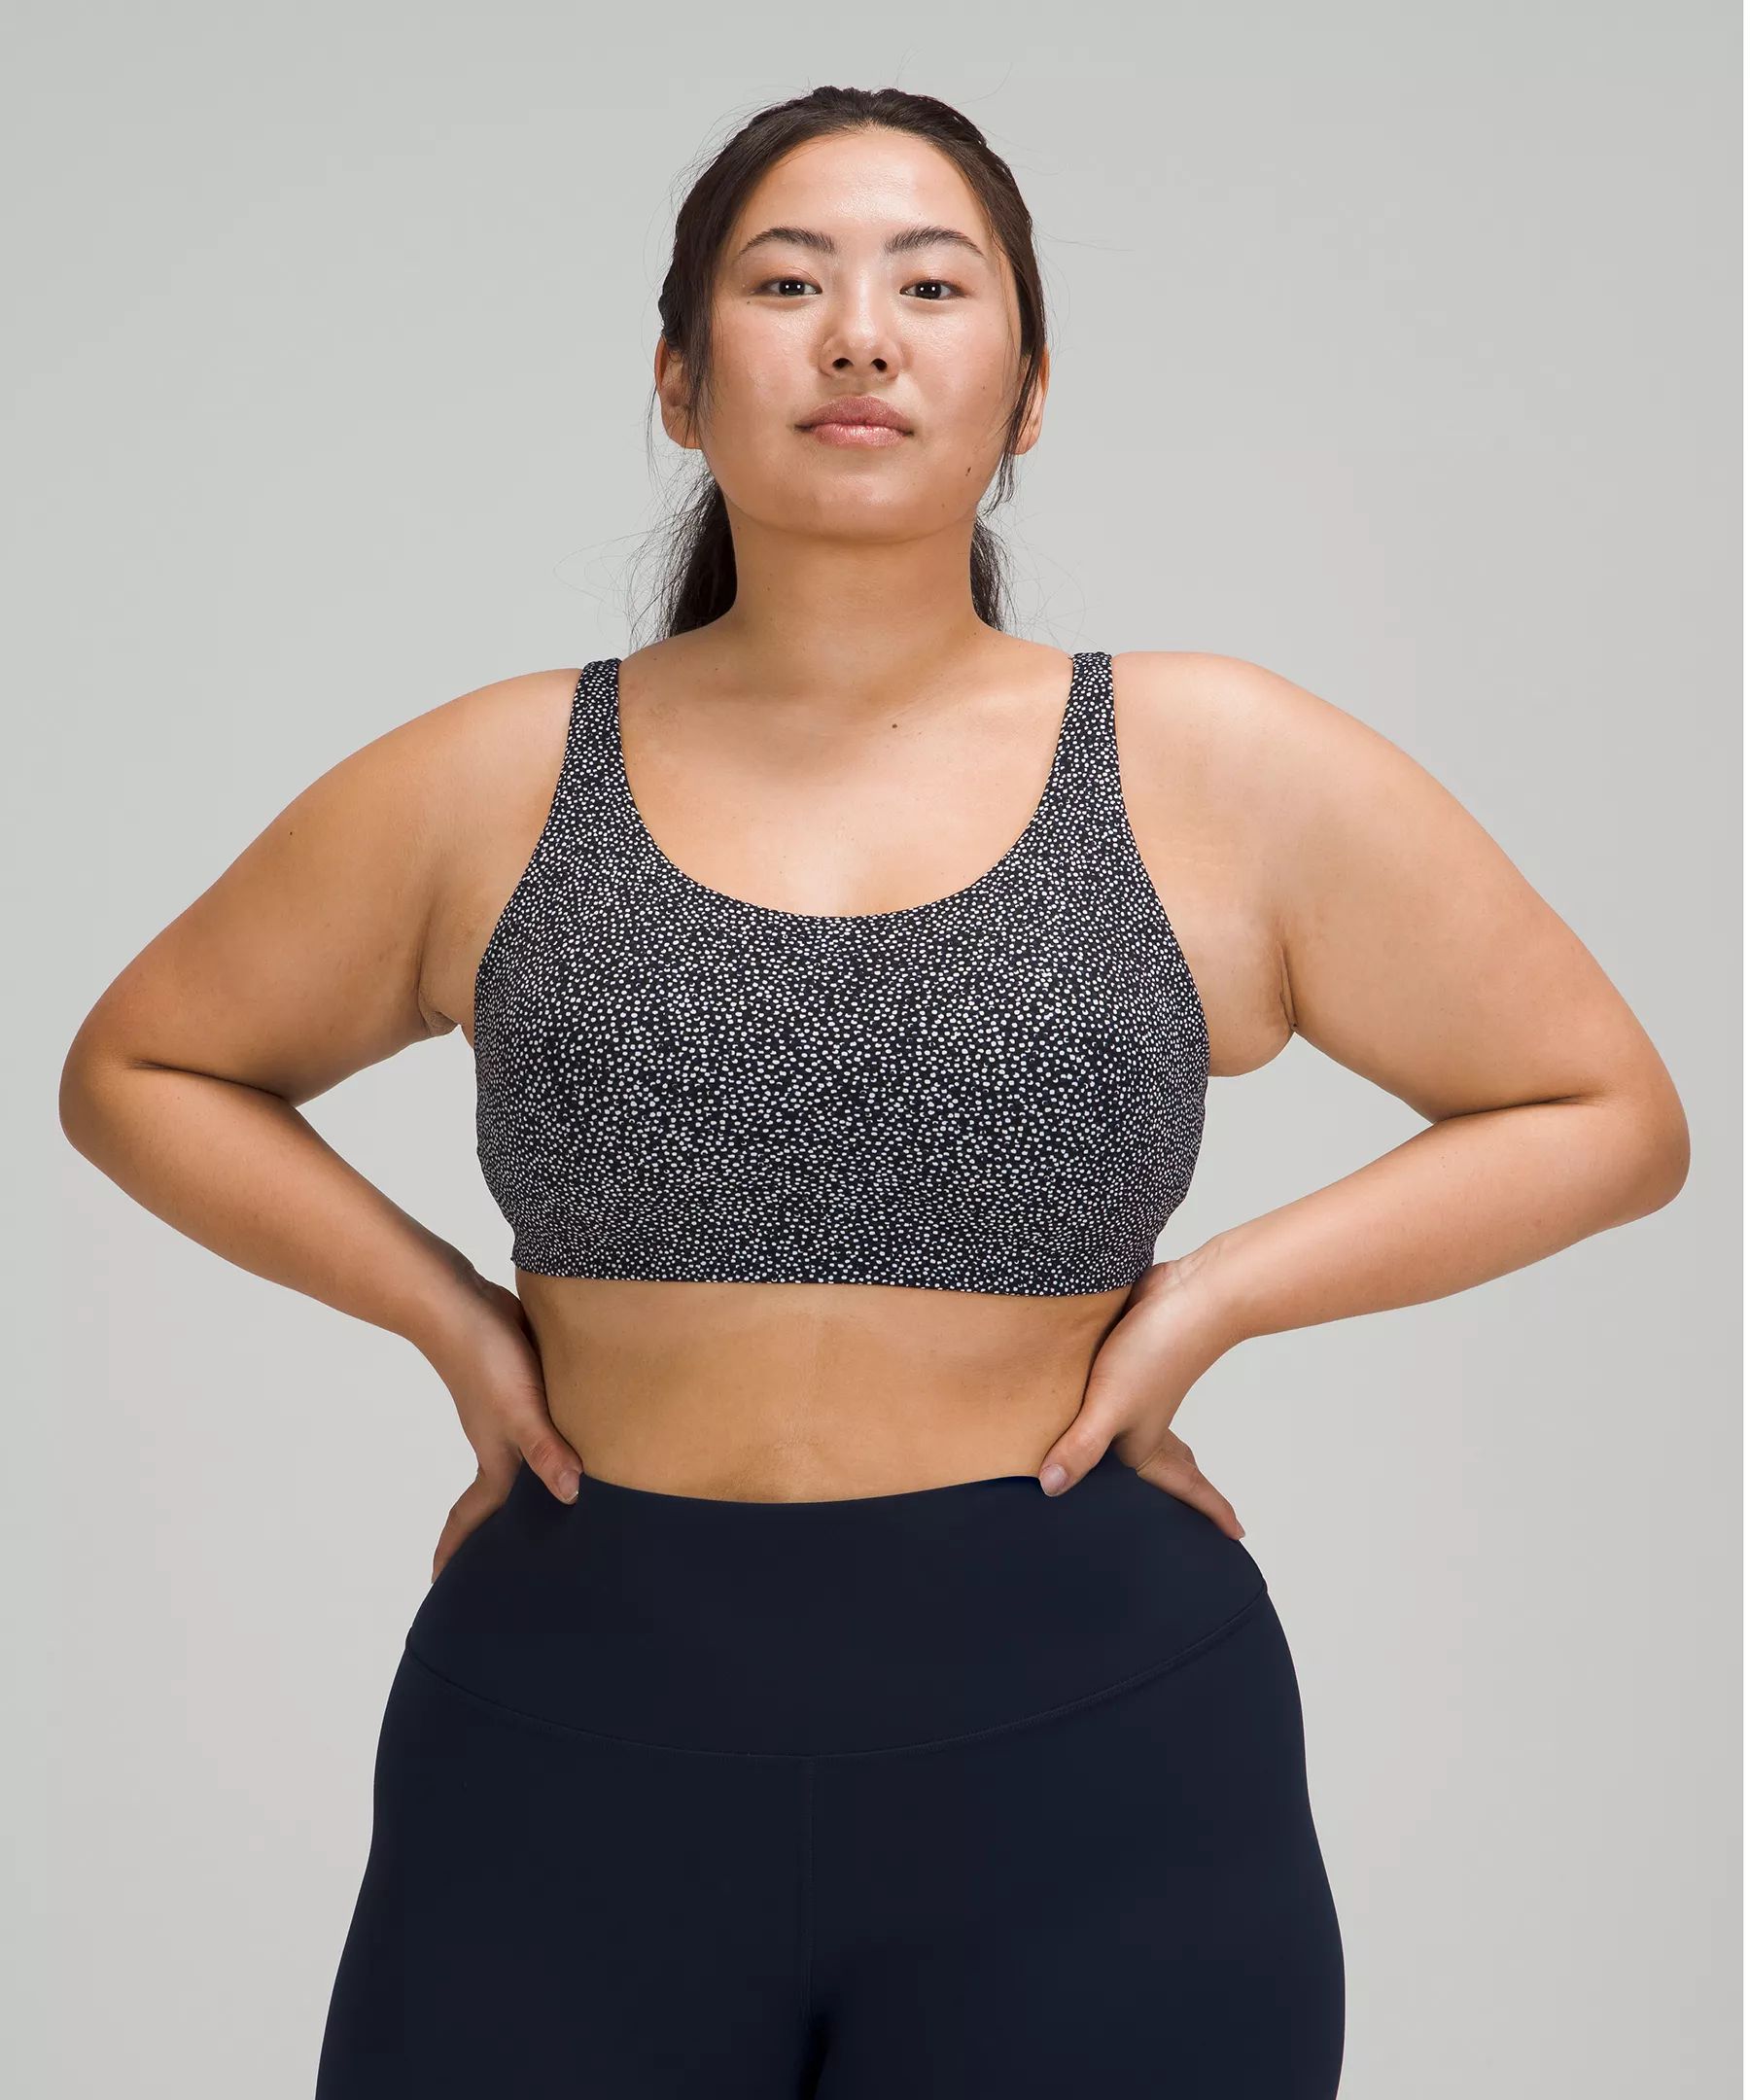 In Alignment Straight-Strap Bra Light Support, C/D Cup | Lululemon (US)